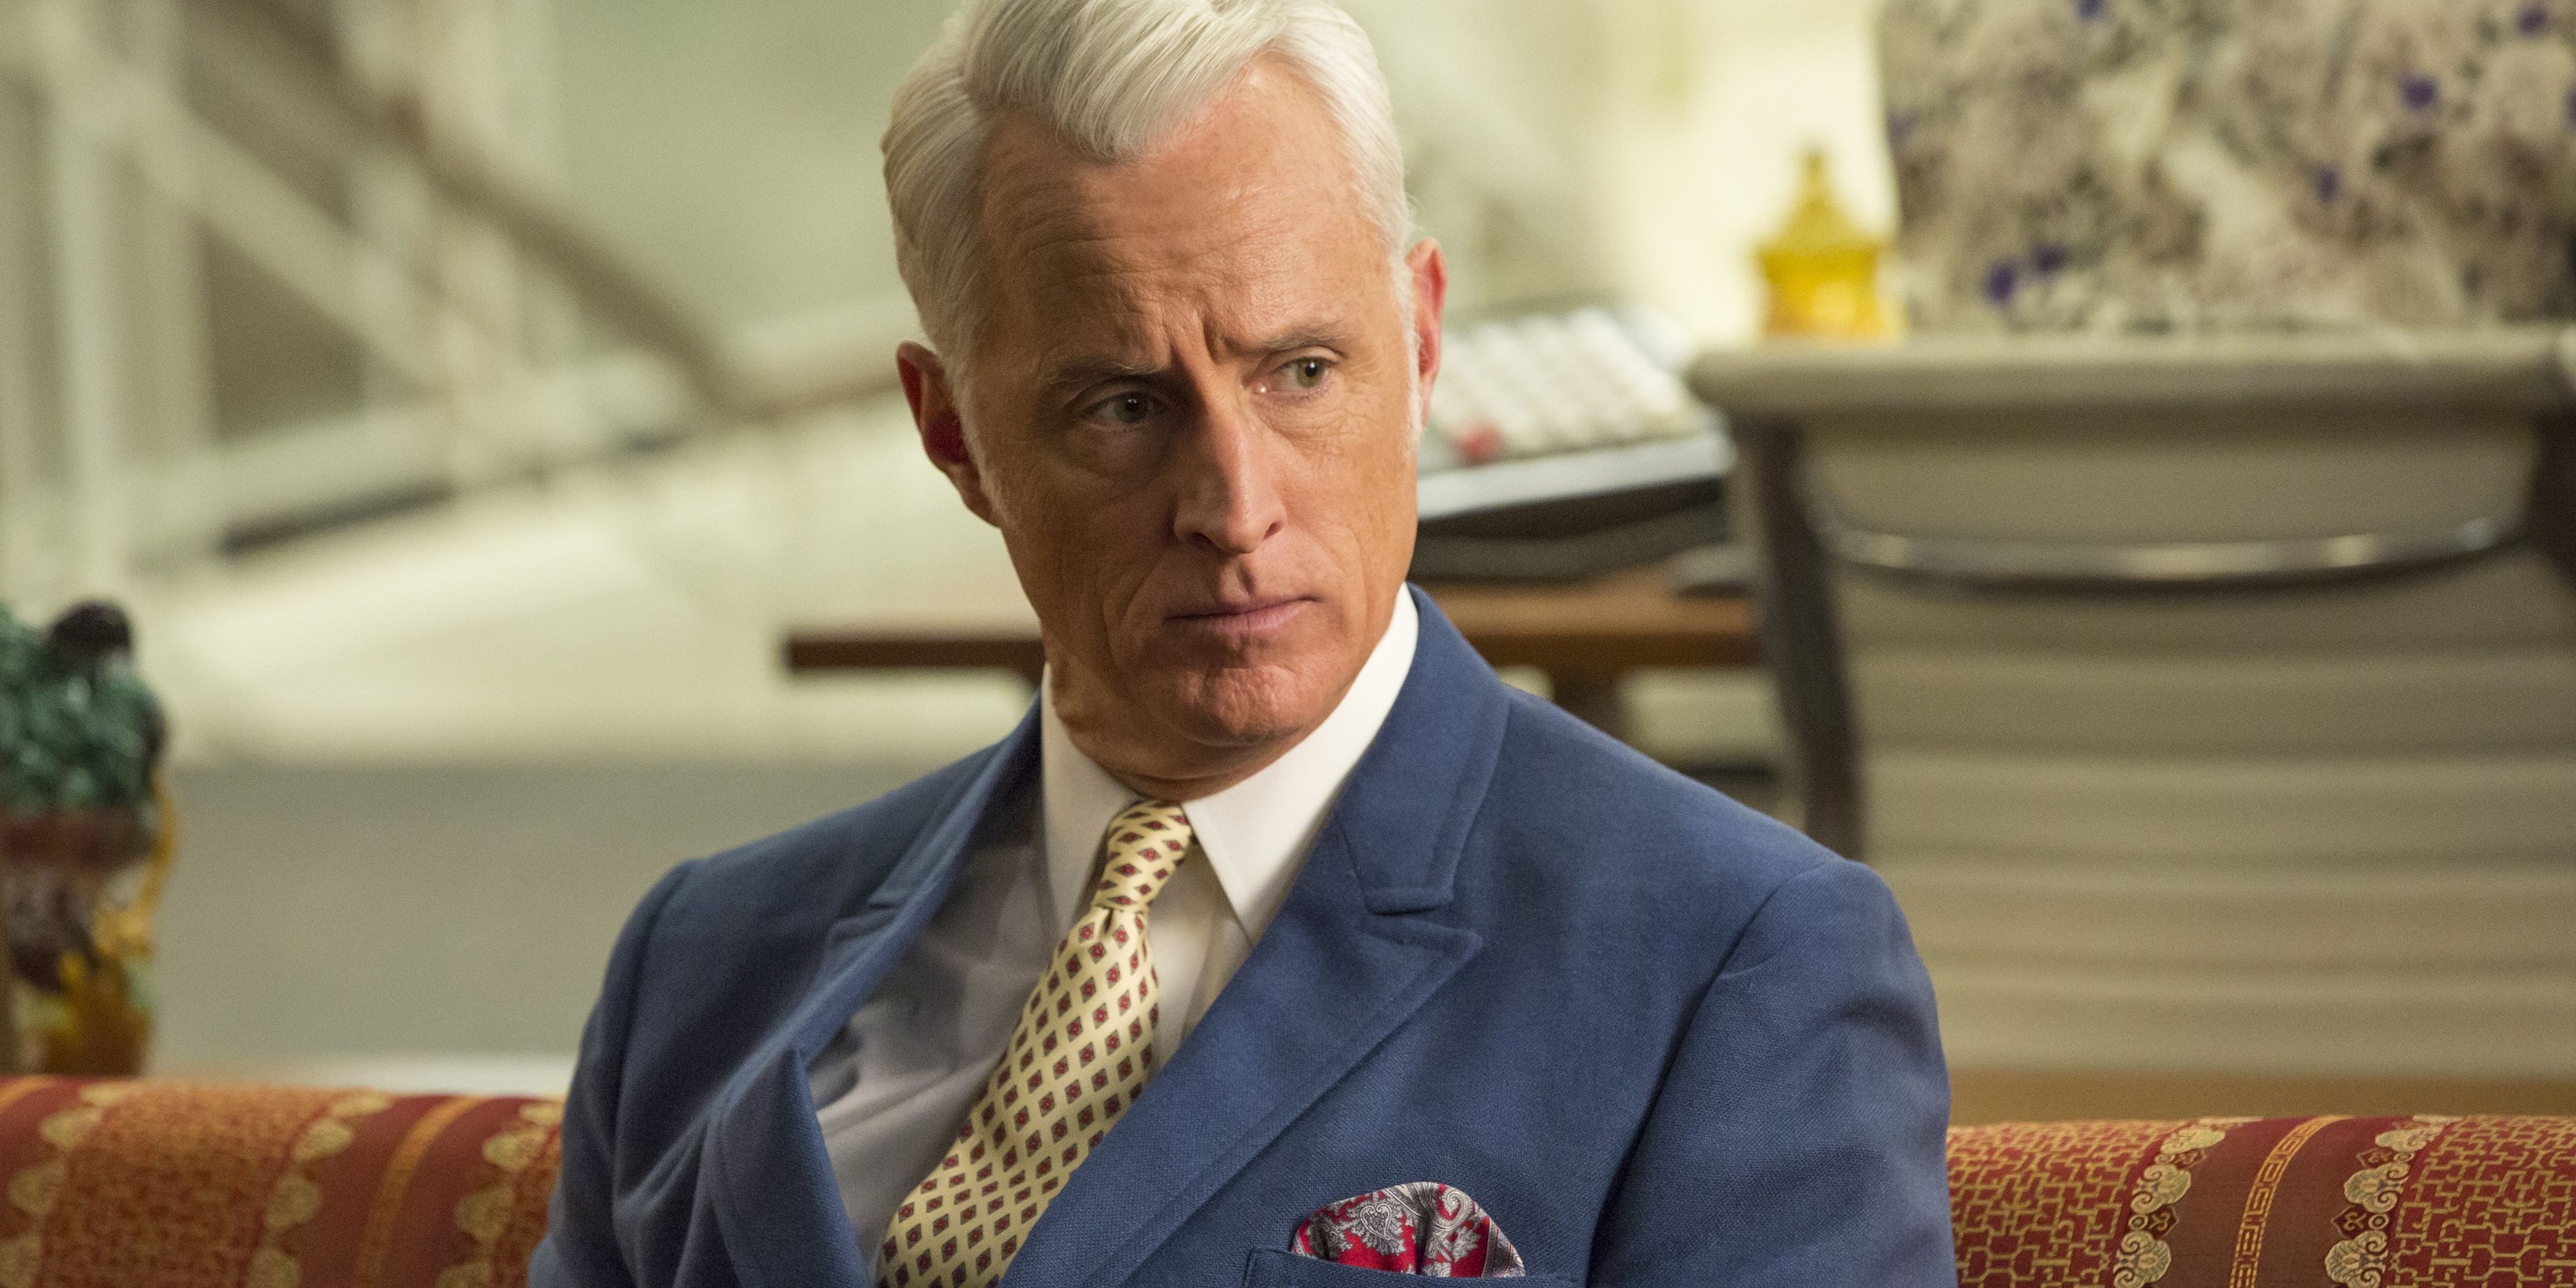 The 10 Best Characters Of Mad Men According To Reddit